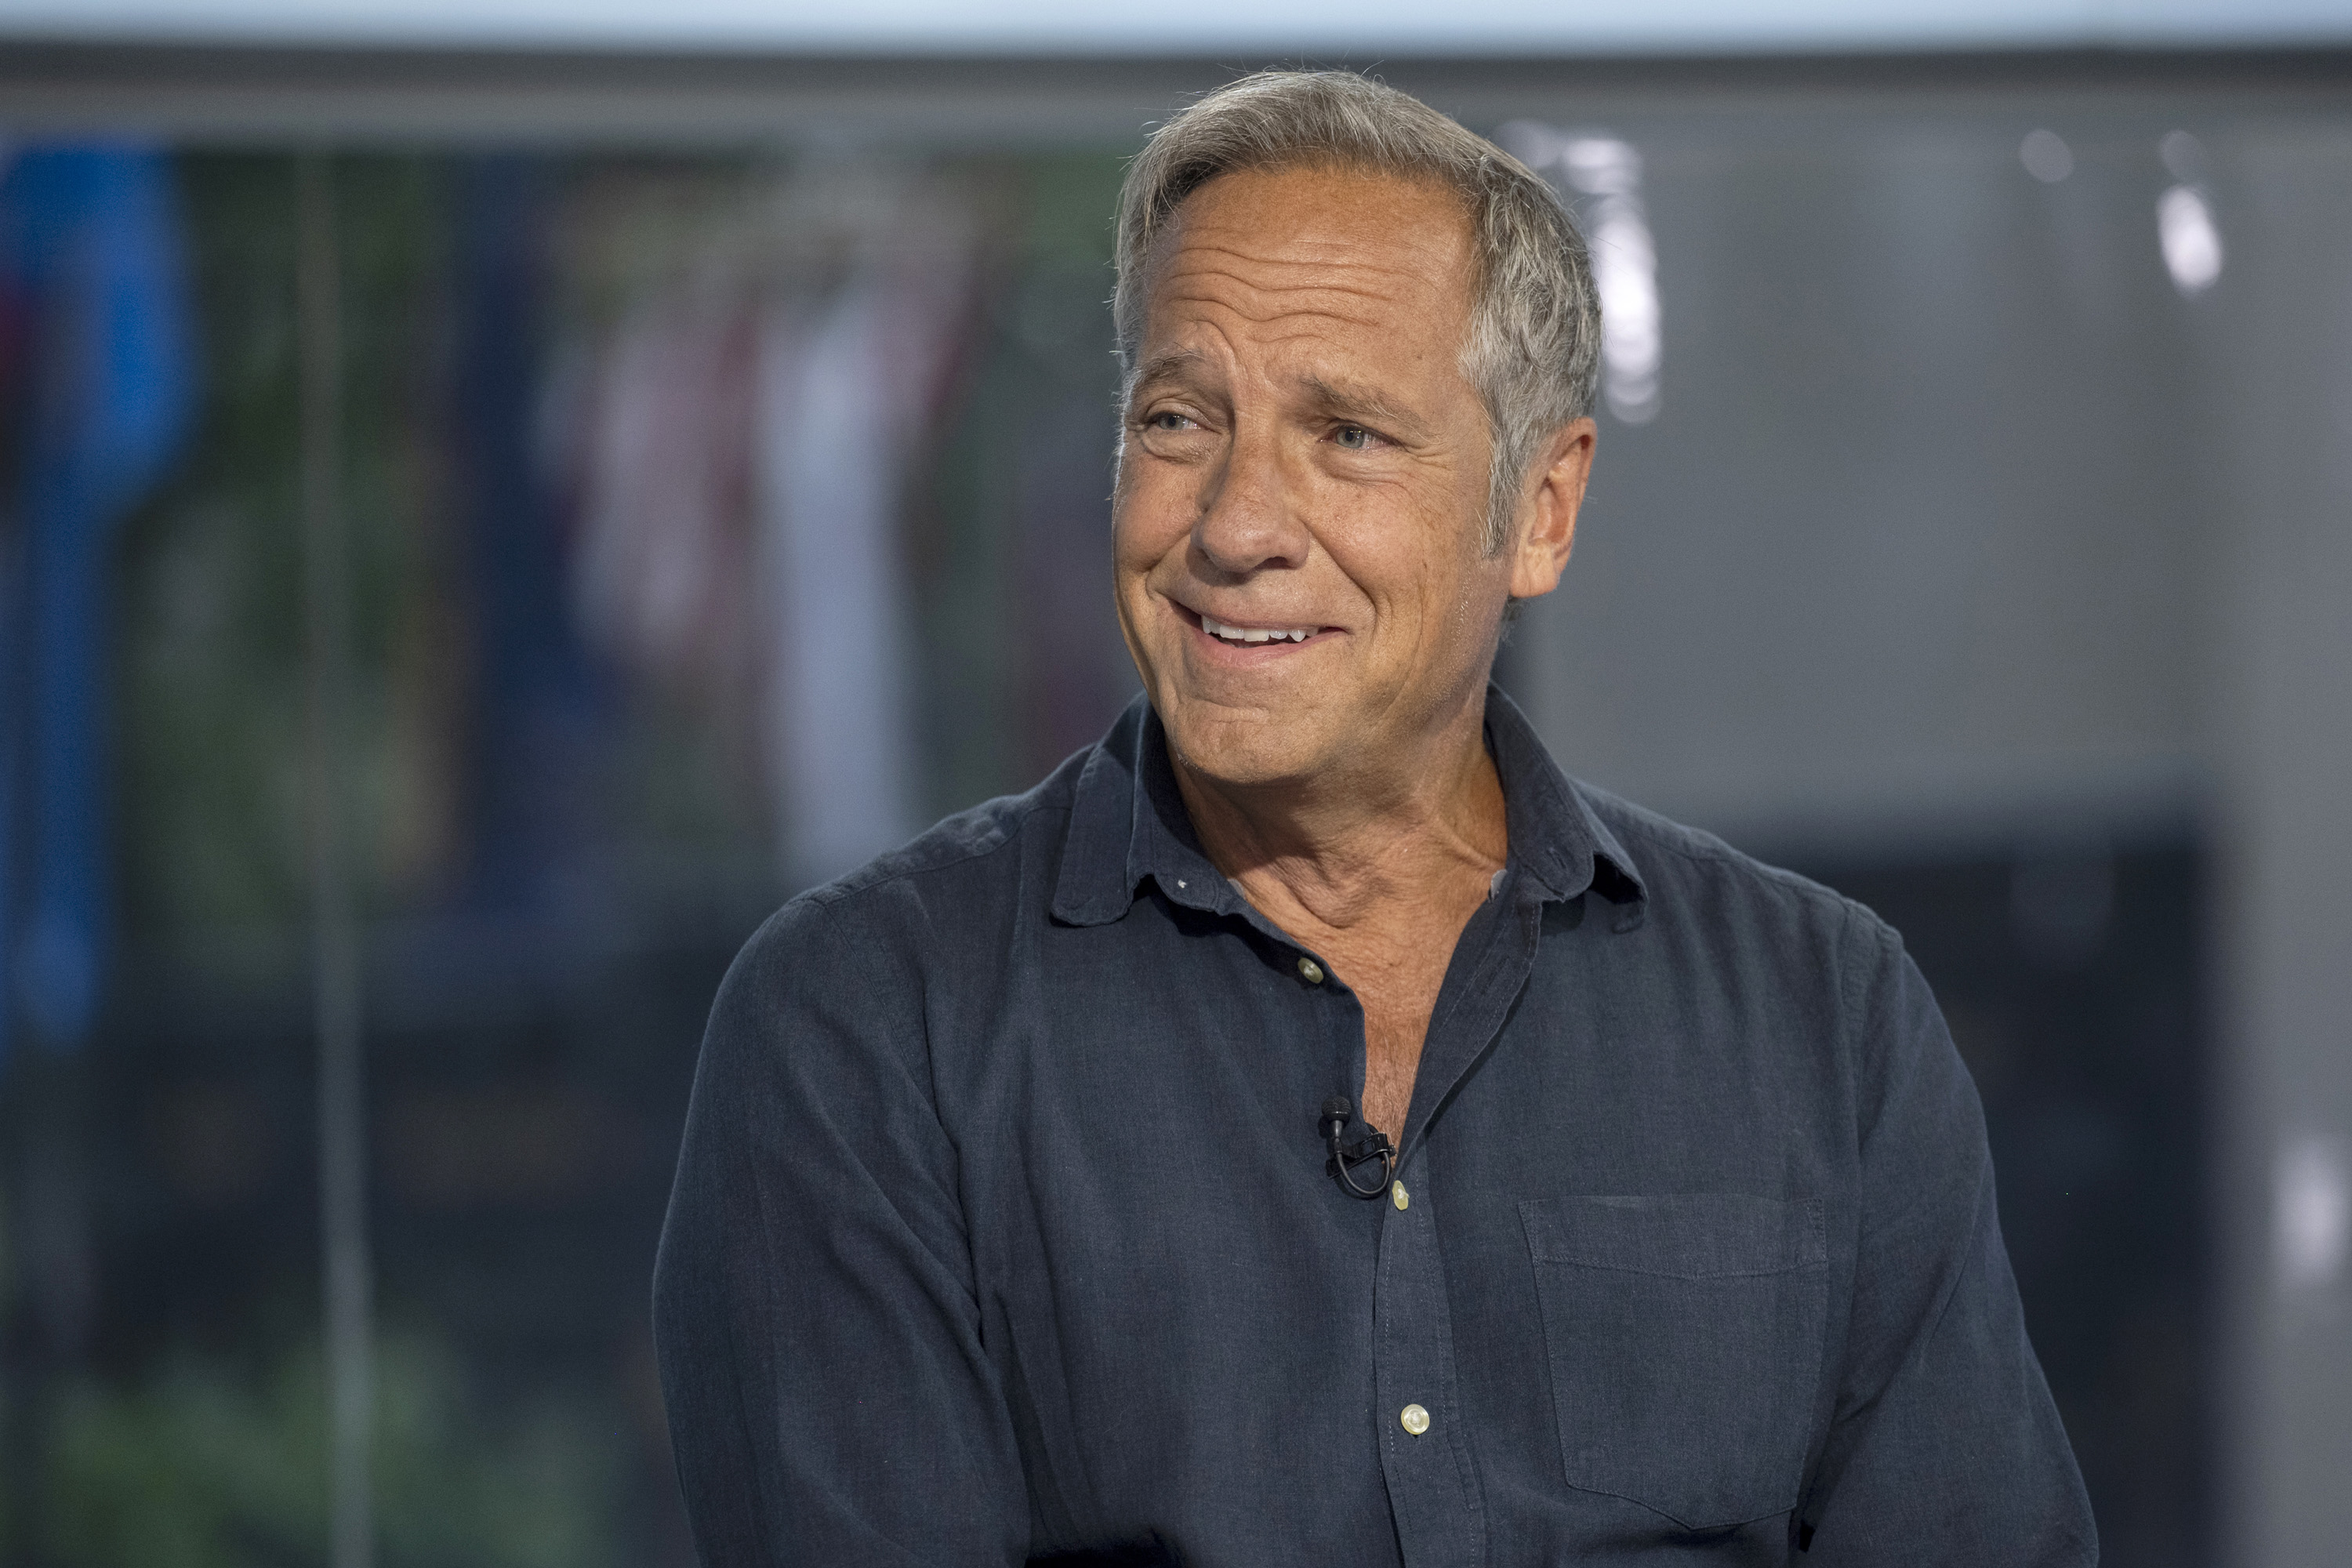 Mike Rowe on Today's show season 71